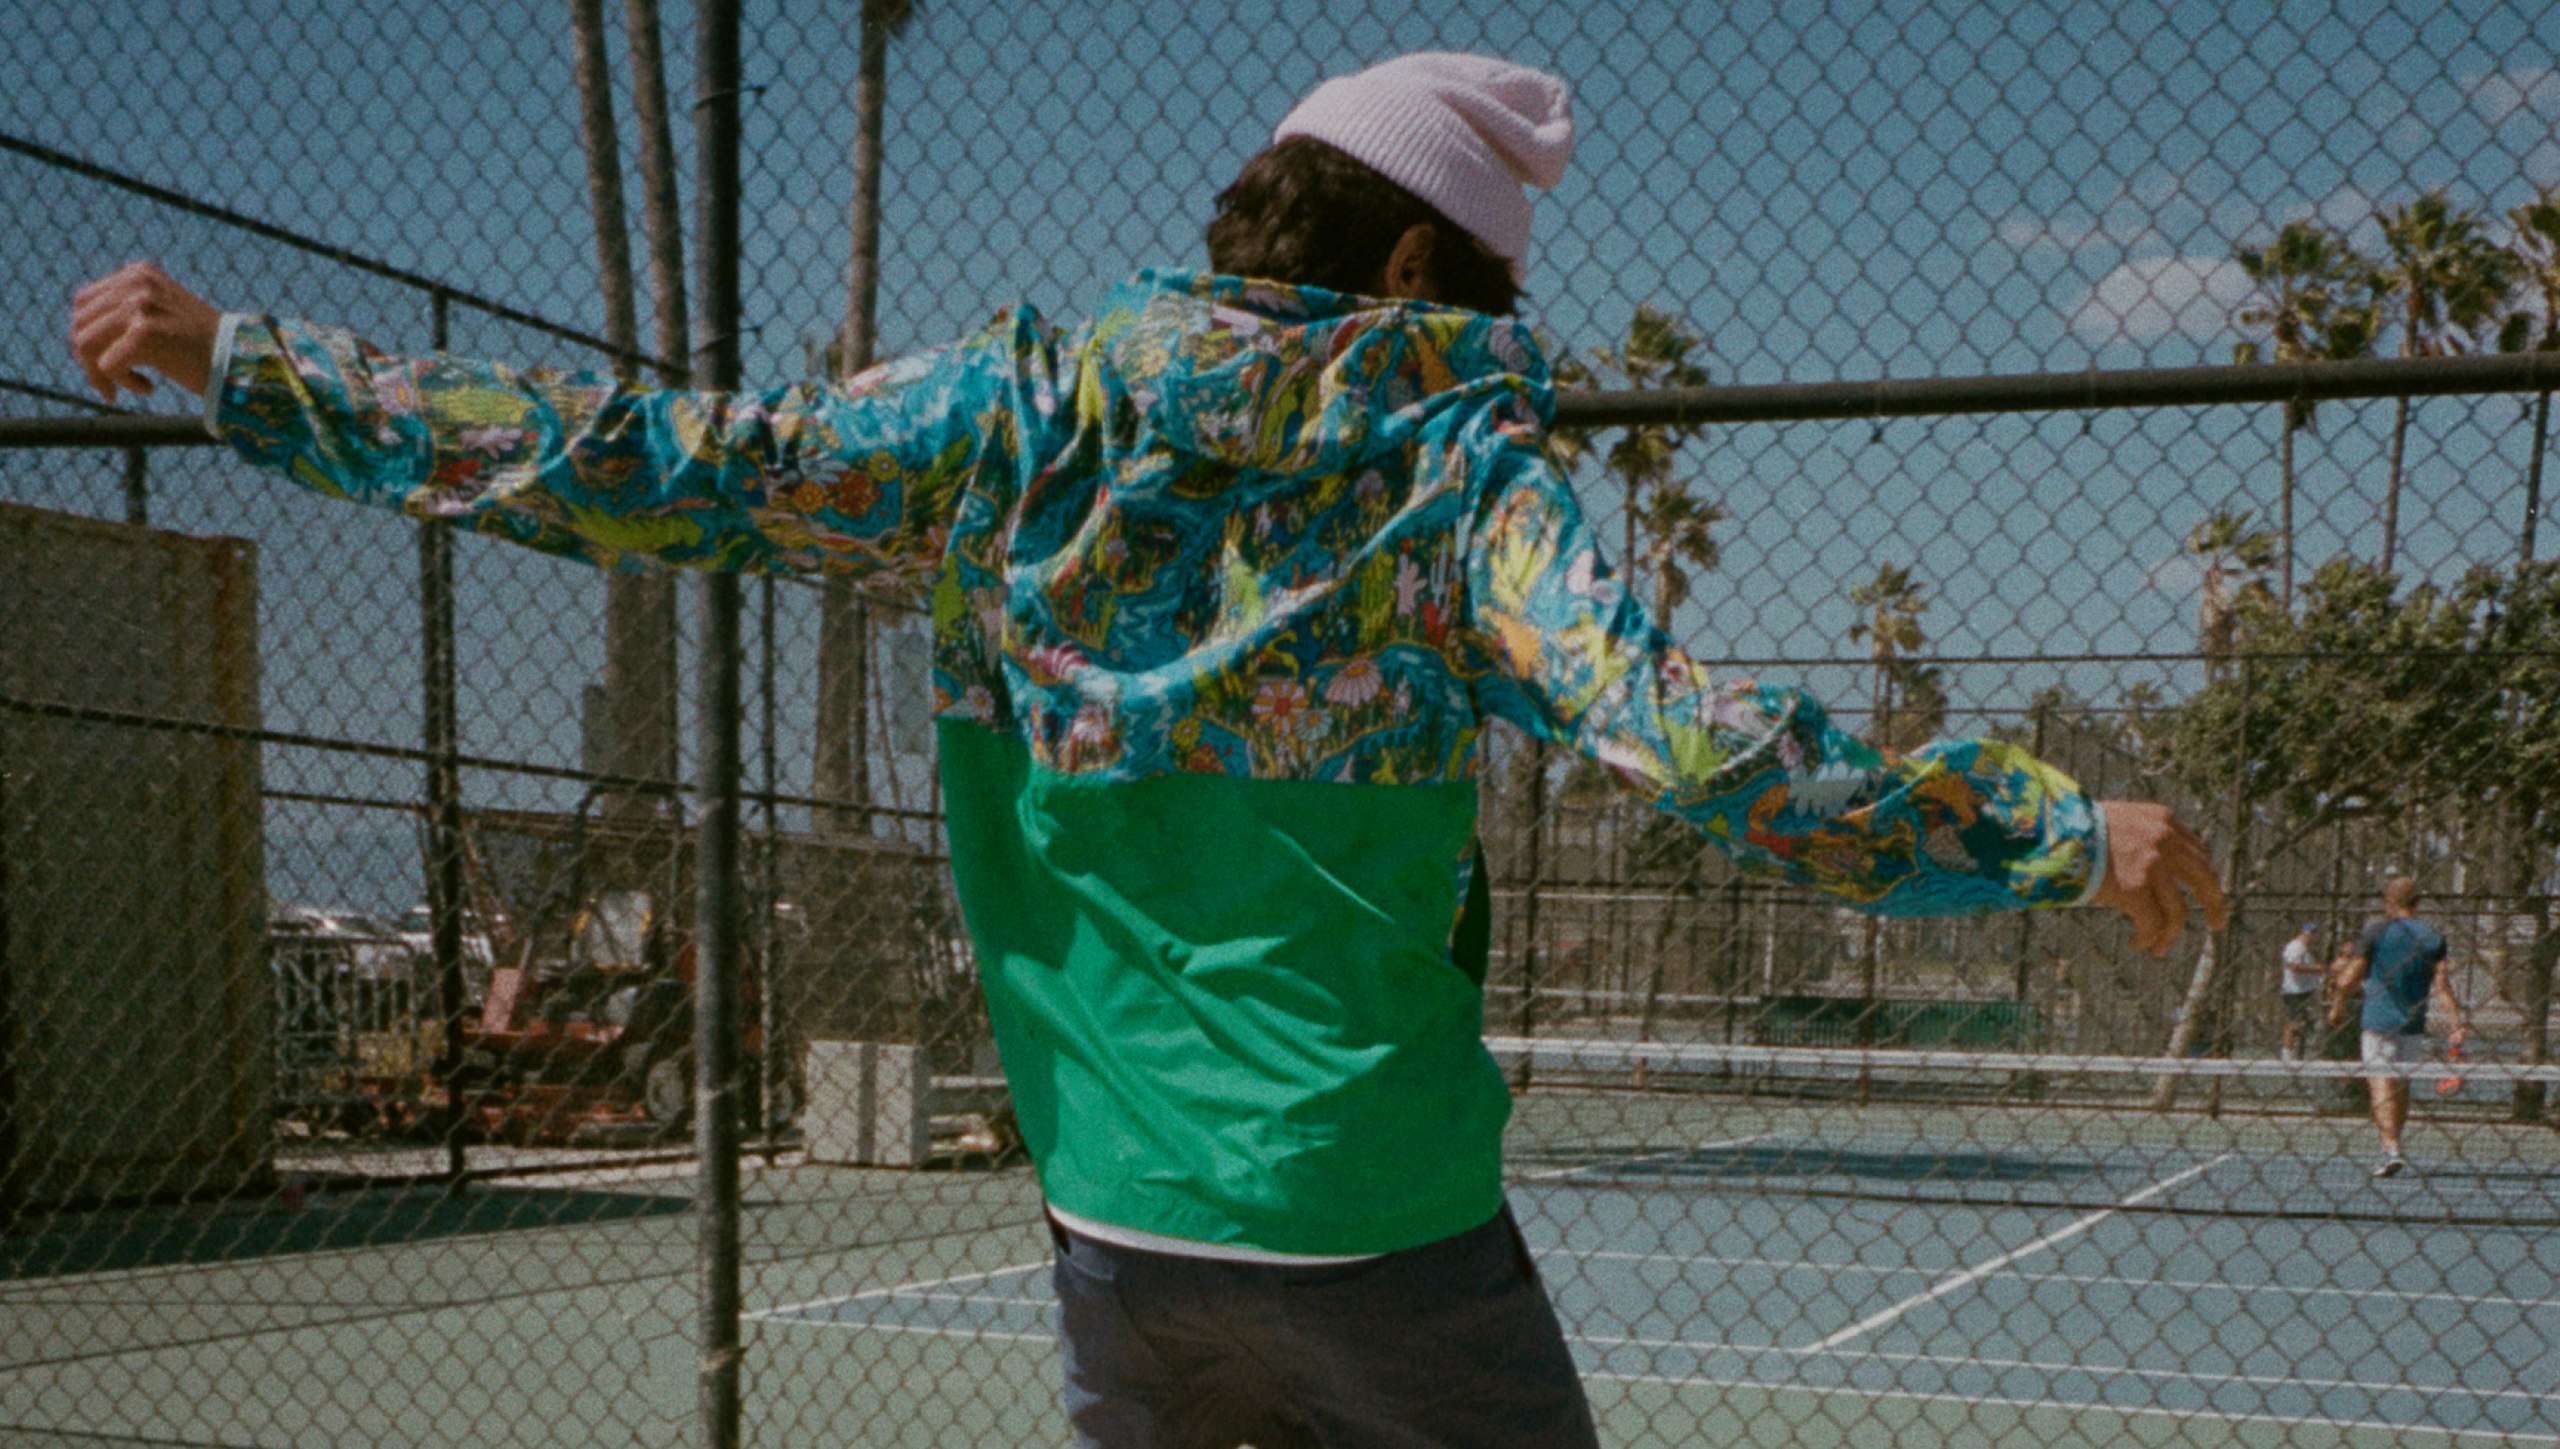 Young man on basketball court in Mike Perry x Fielder jacket